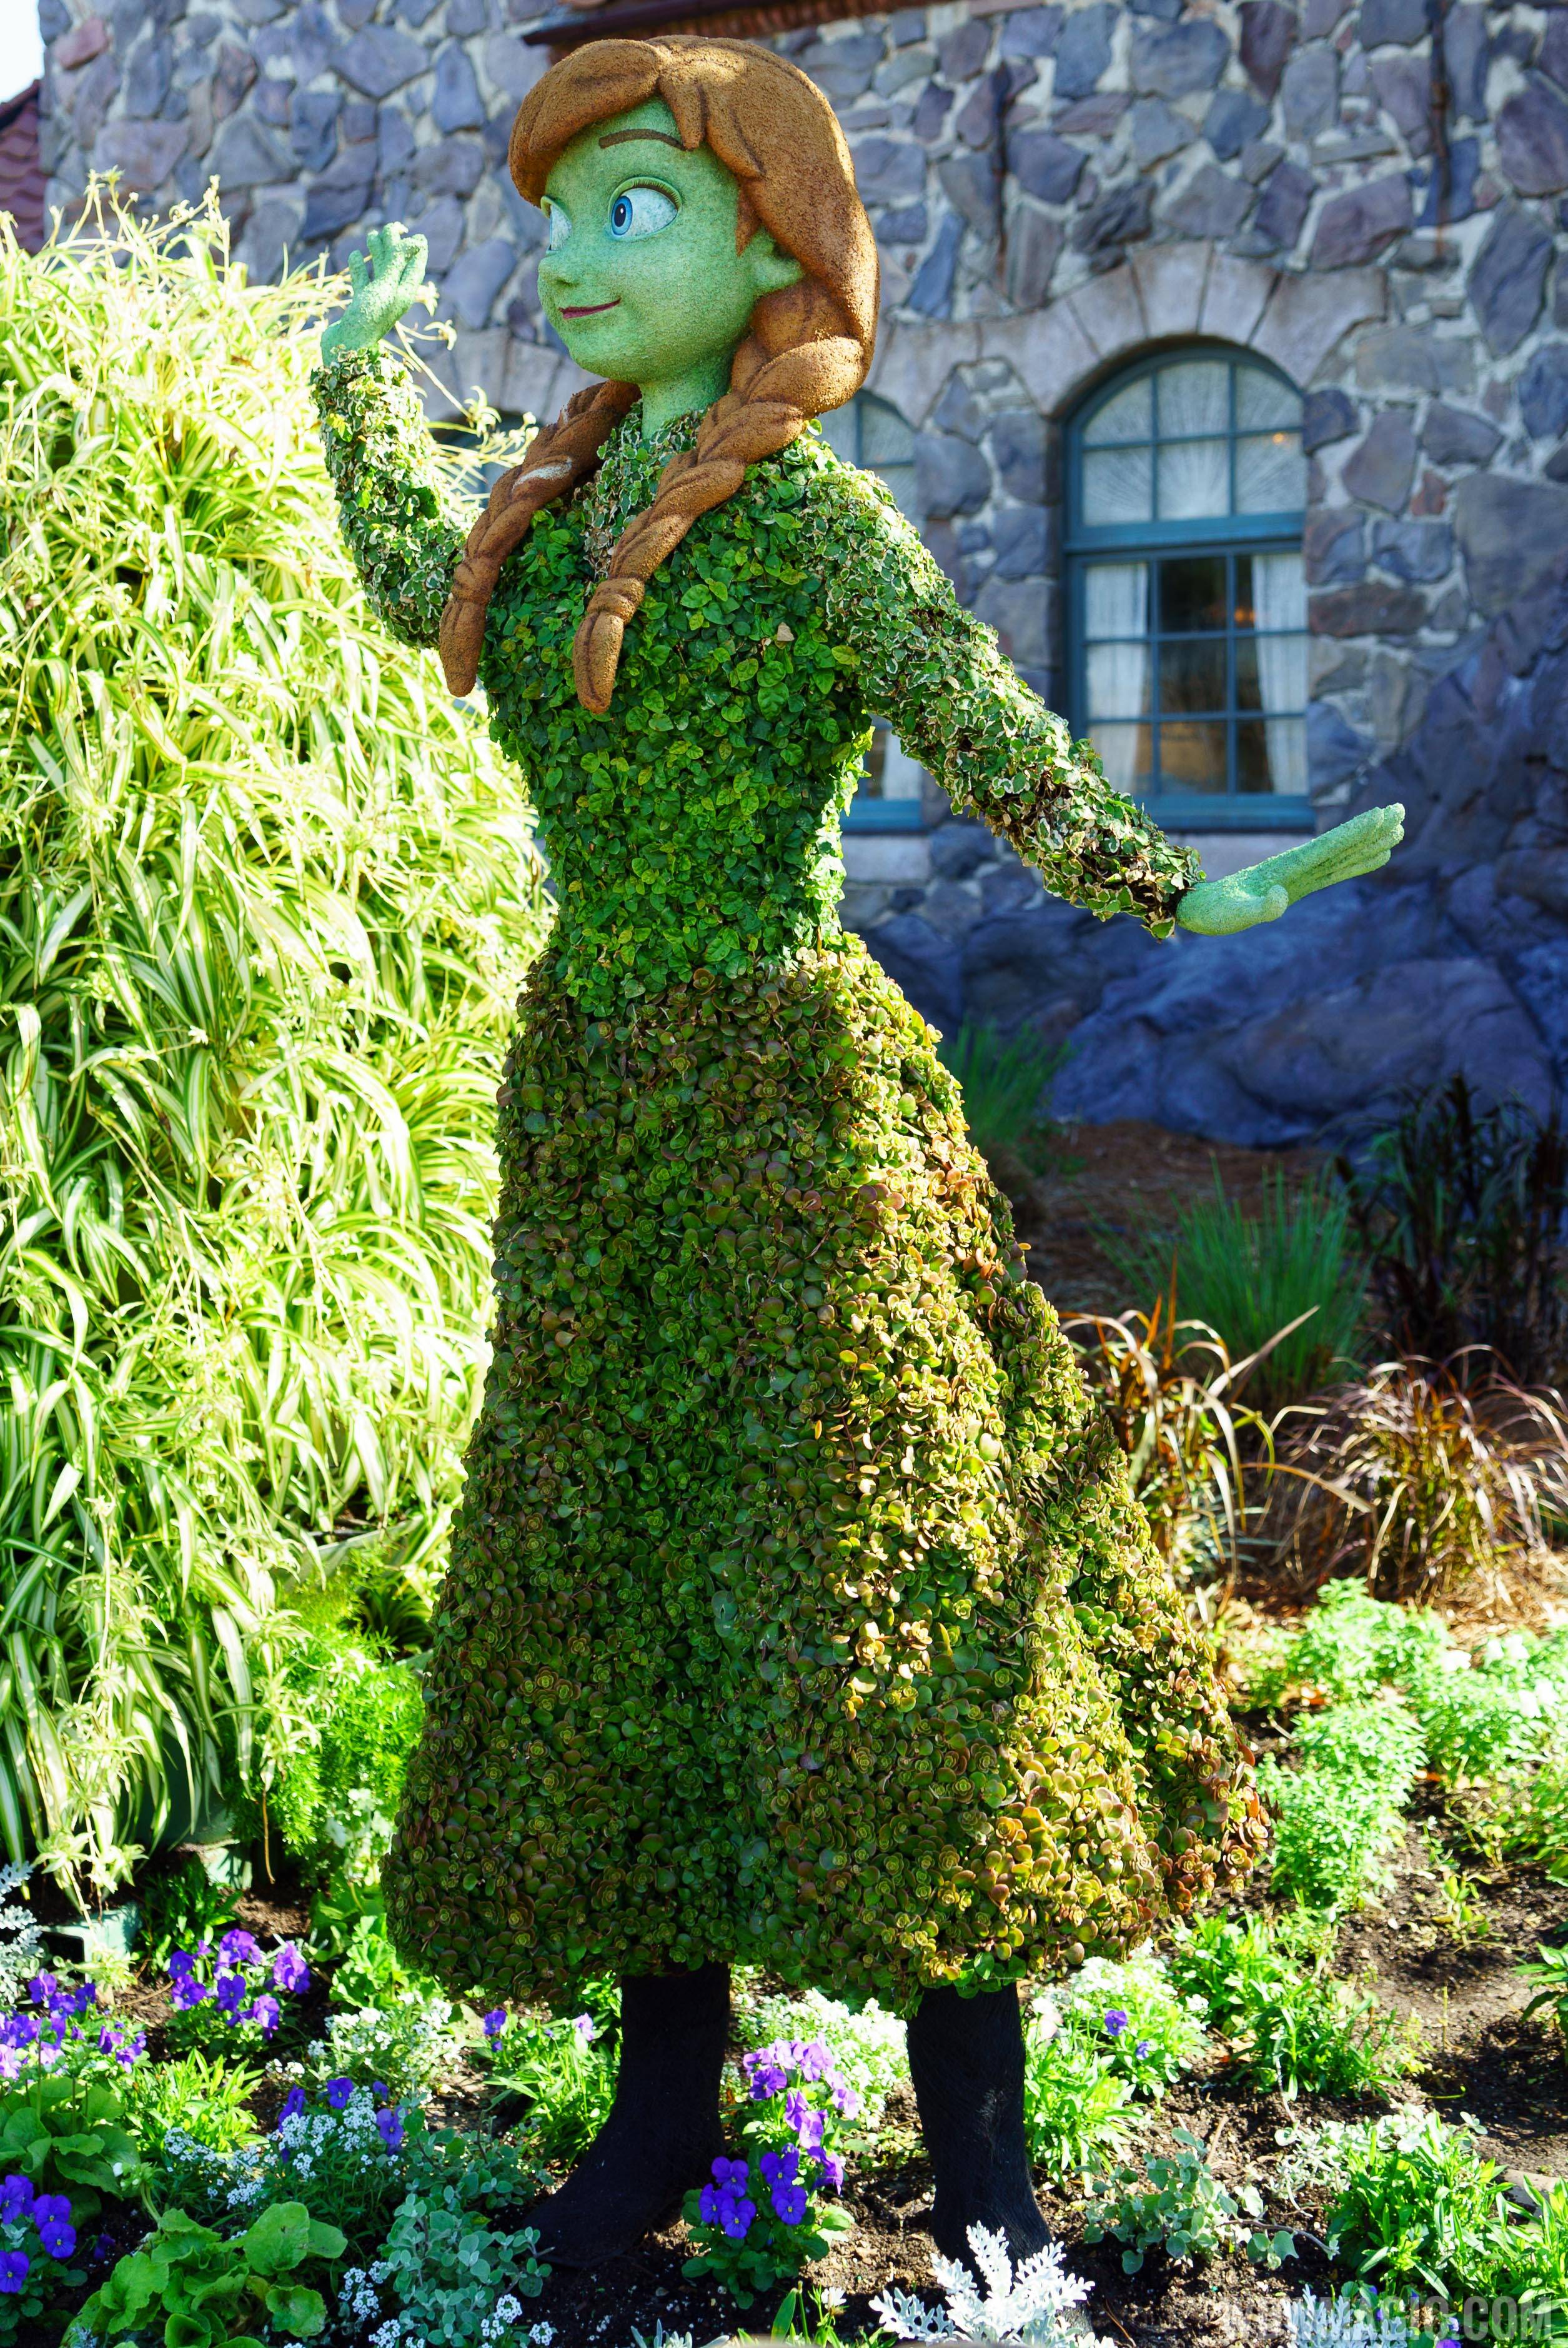 2016 Epcot International Flower and Garden Festival - Anna topiary